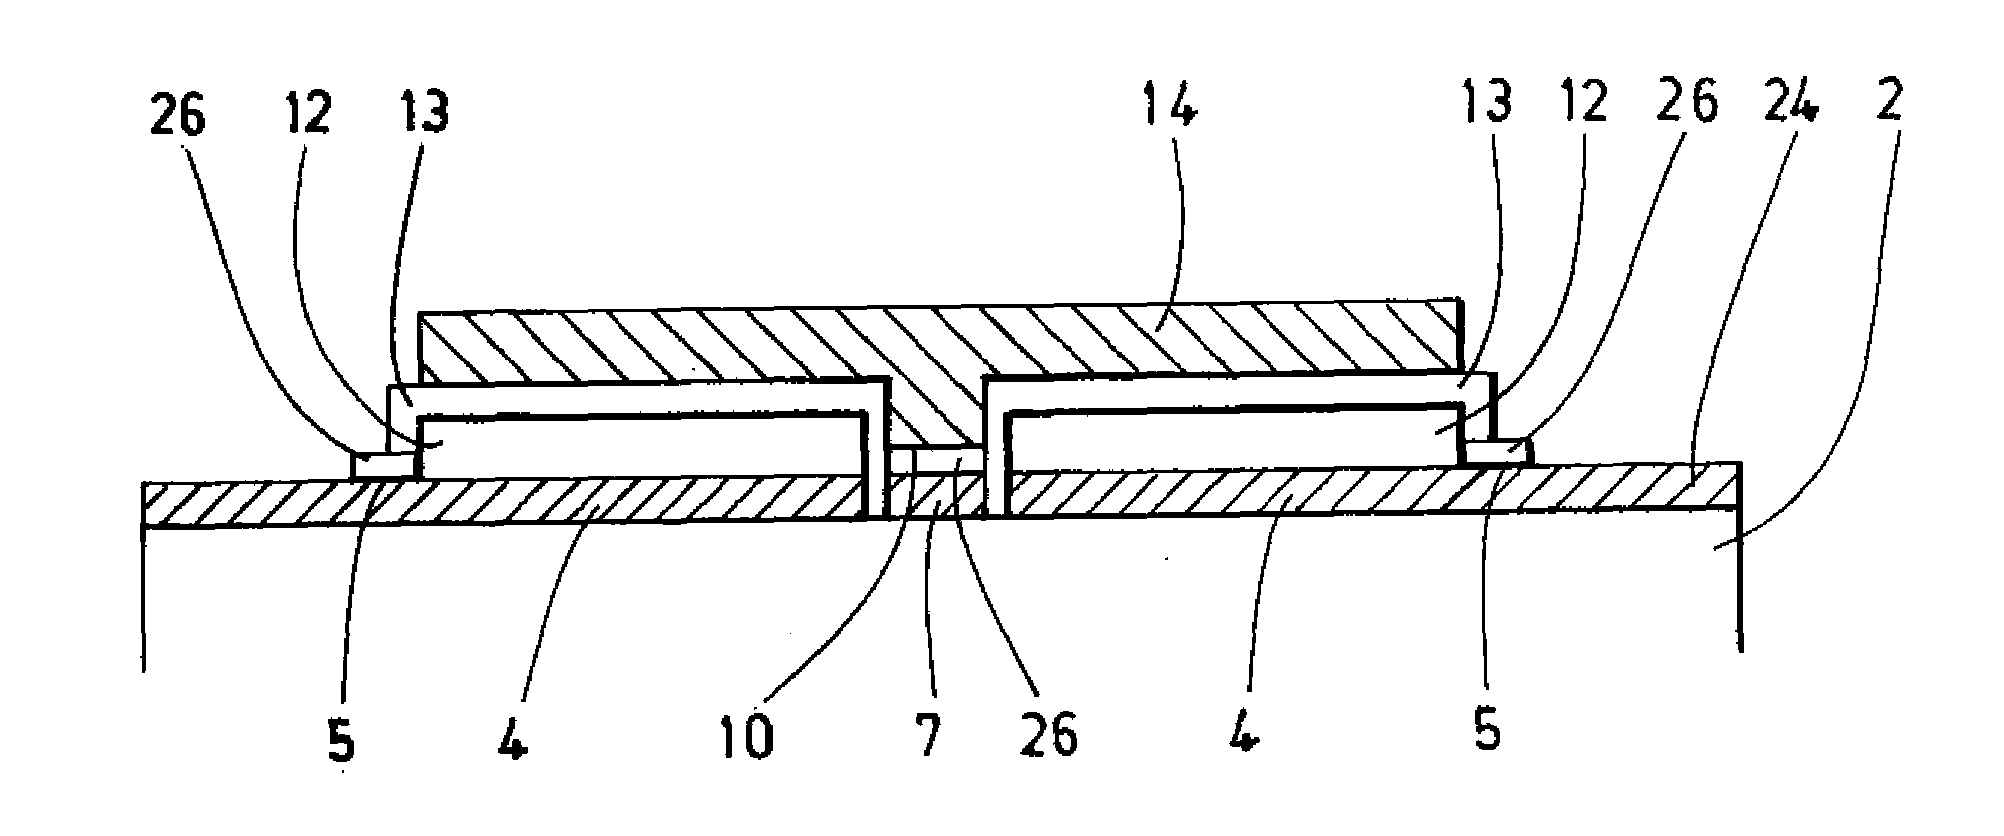 Sealed Monolithic Photo-Electrochemical System and a Method for Manufacturing a Sealed Monolithic Photo Electrochemical System